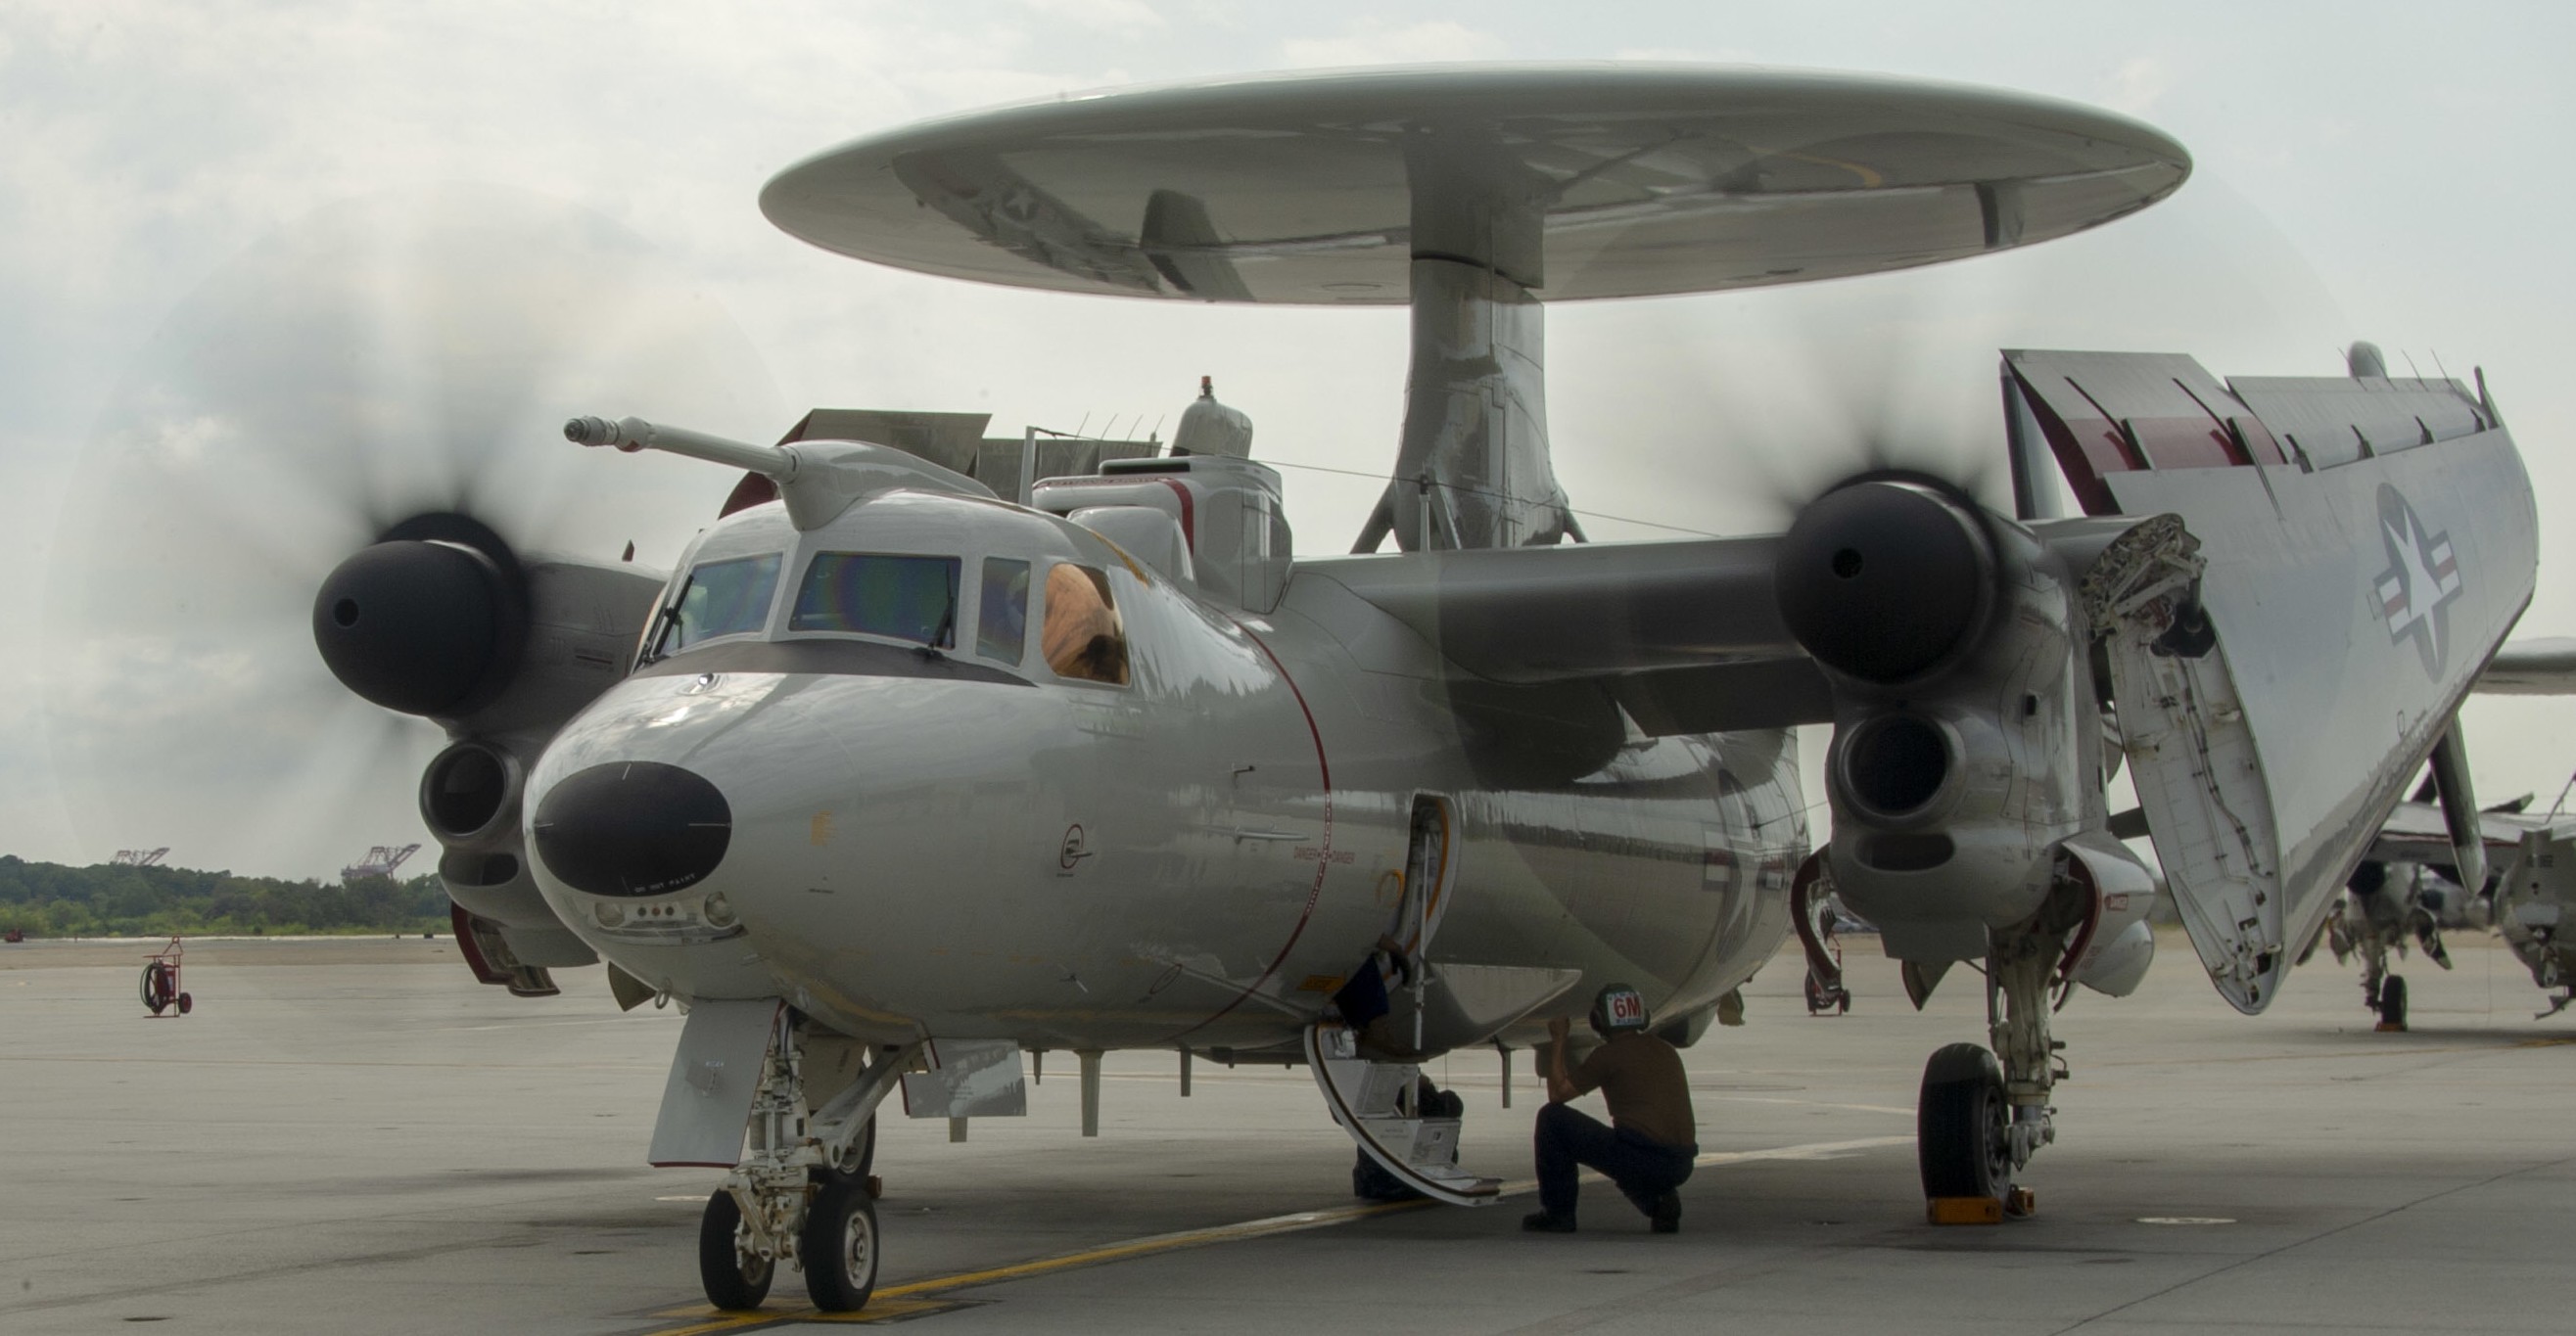 vaw-120 greyhawks airborne command control squadron e-2d advanced hawkeye replacement nas norfolk virginia 54